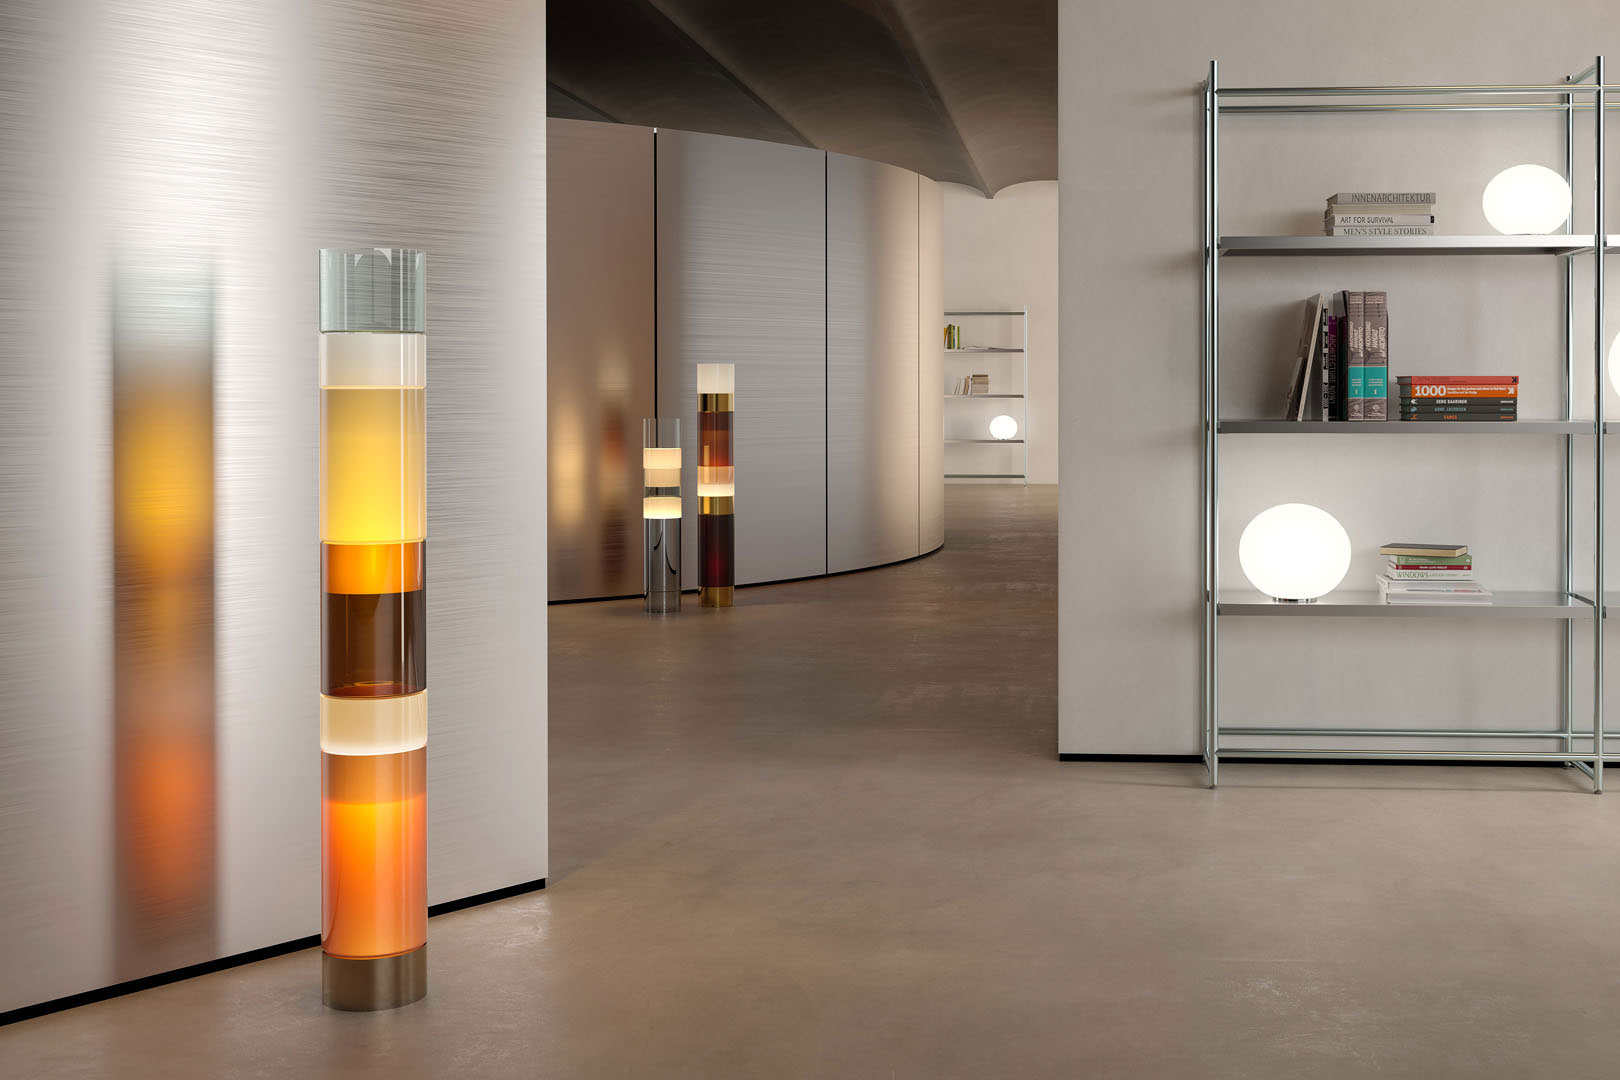 Stacking is a chic Murano glass floor lamp and the epitome of contemporary cool. This Italian design floor lamp showcases blown glass cylinders in distinct colors and sizes.